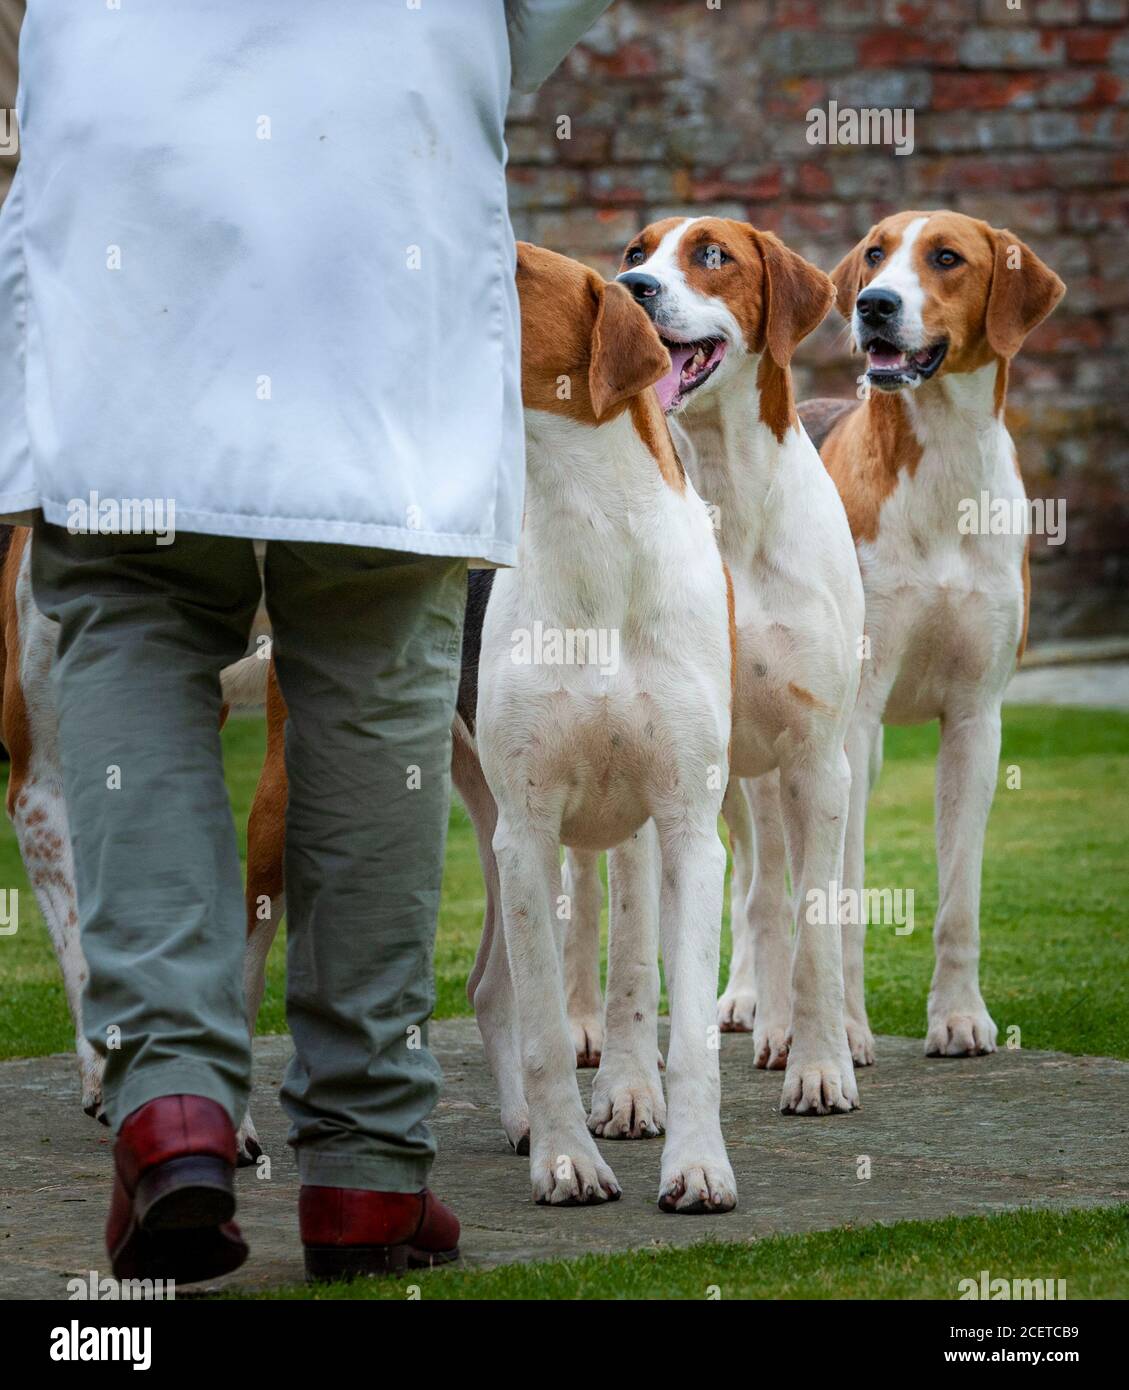 Belvoir, Lincolnshire, UK - Fox Hounds at a hound show at the Belvoir Hunt Kennels Stock Photo